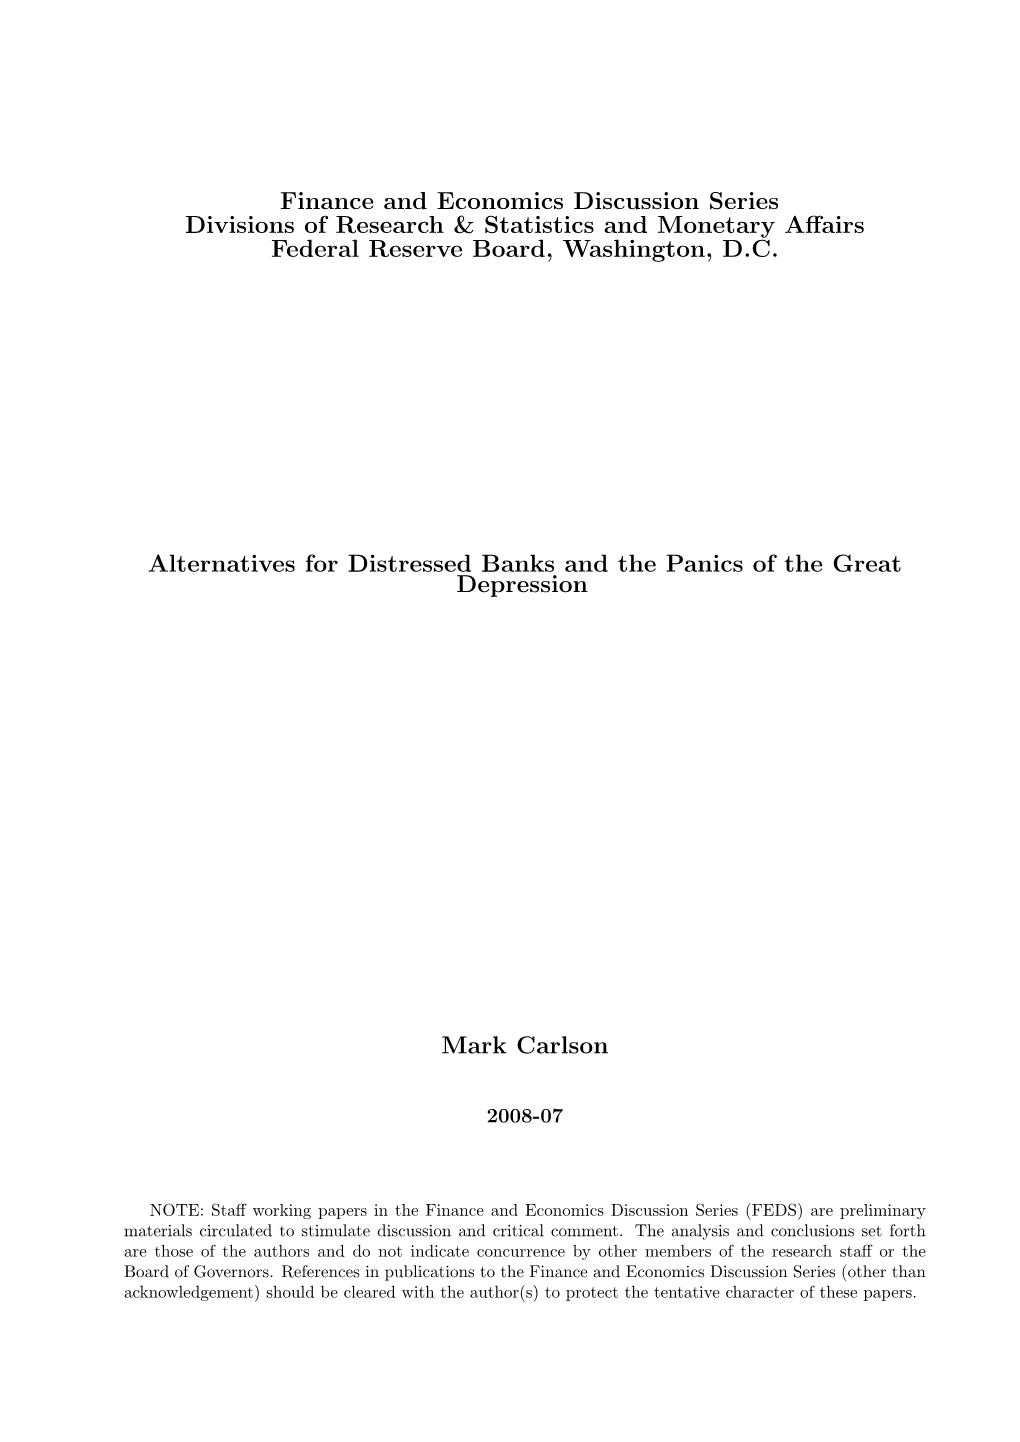 Alternatives for Distressed Banks and the Panics of the Great Depression